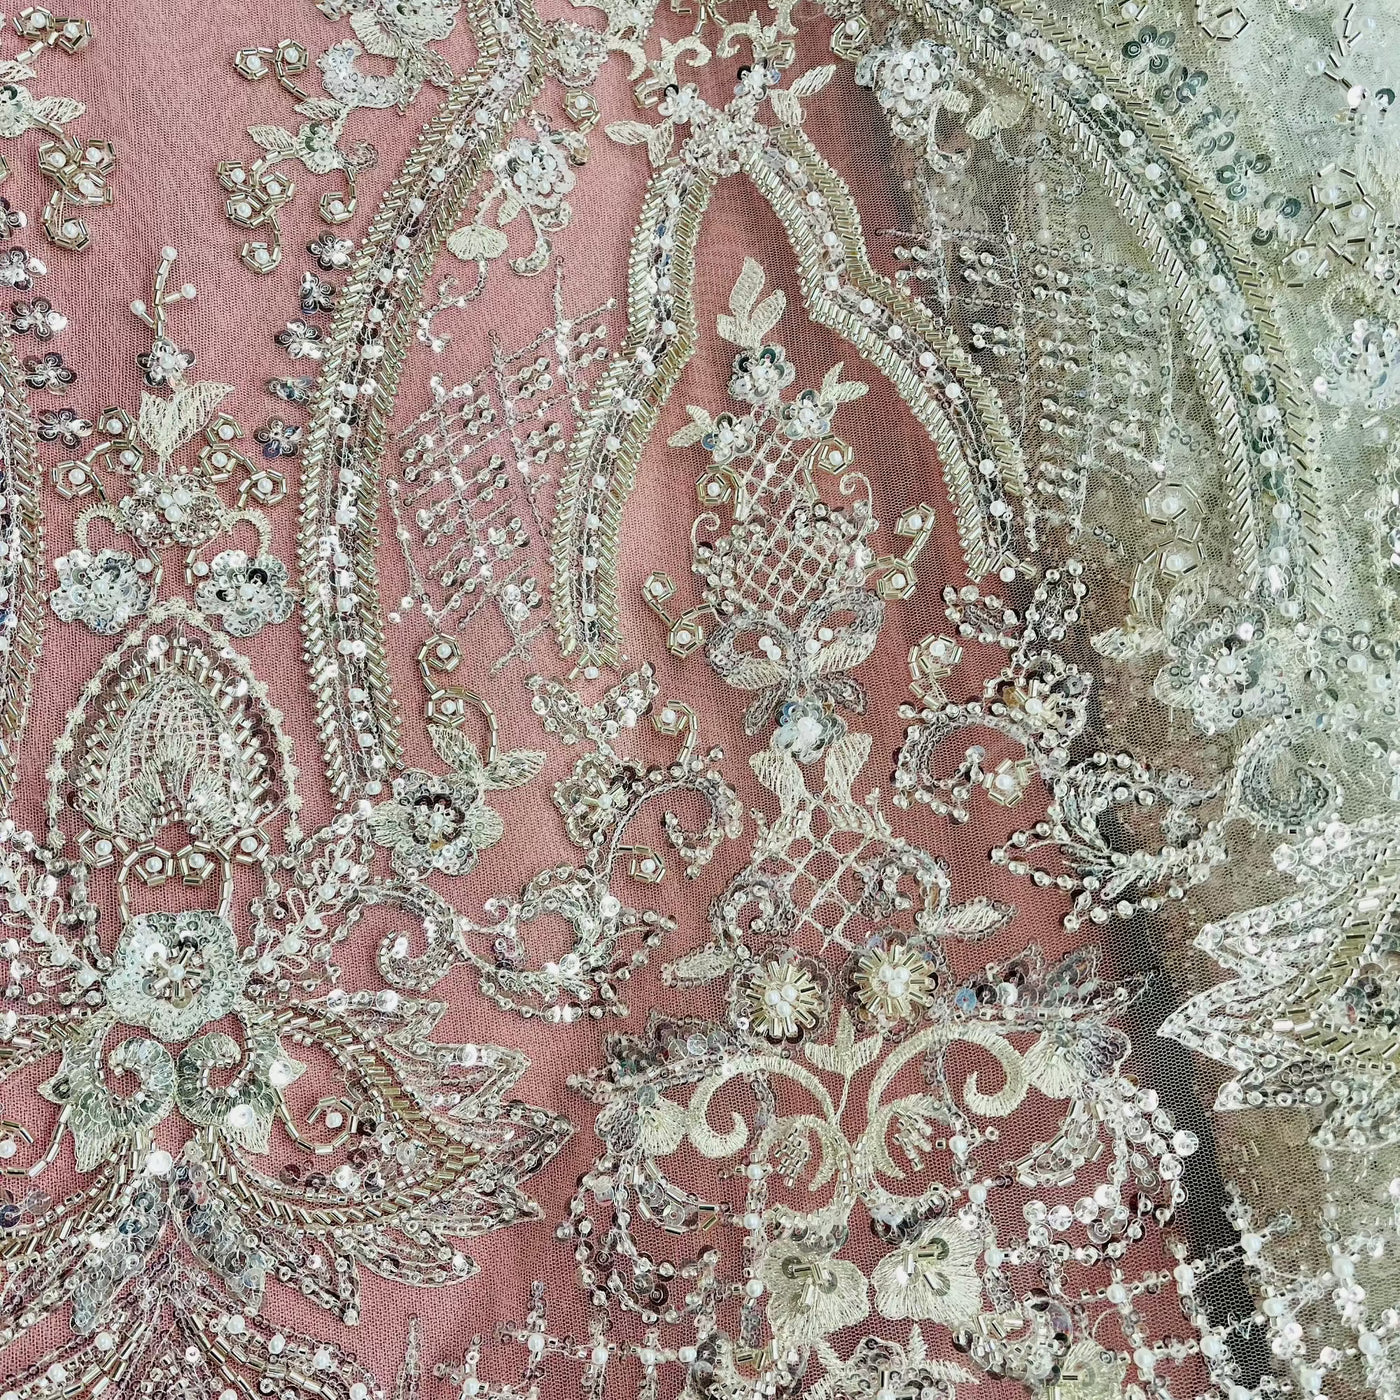 Beaded Lace Fabric Embroidered on 100% Polyester Net Mesh | Lace USA - GD-227239 Antique Silver